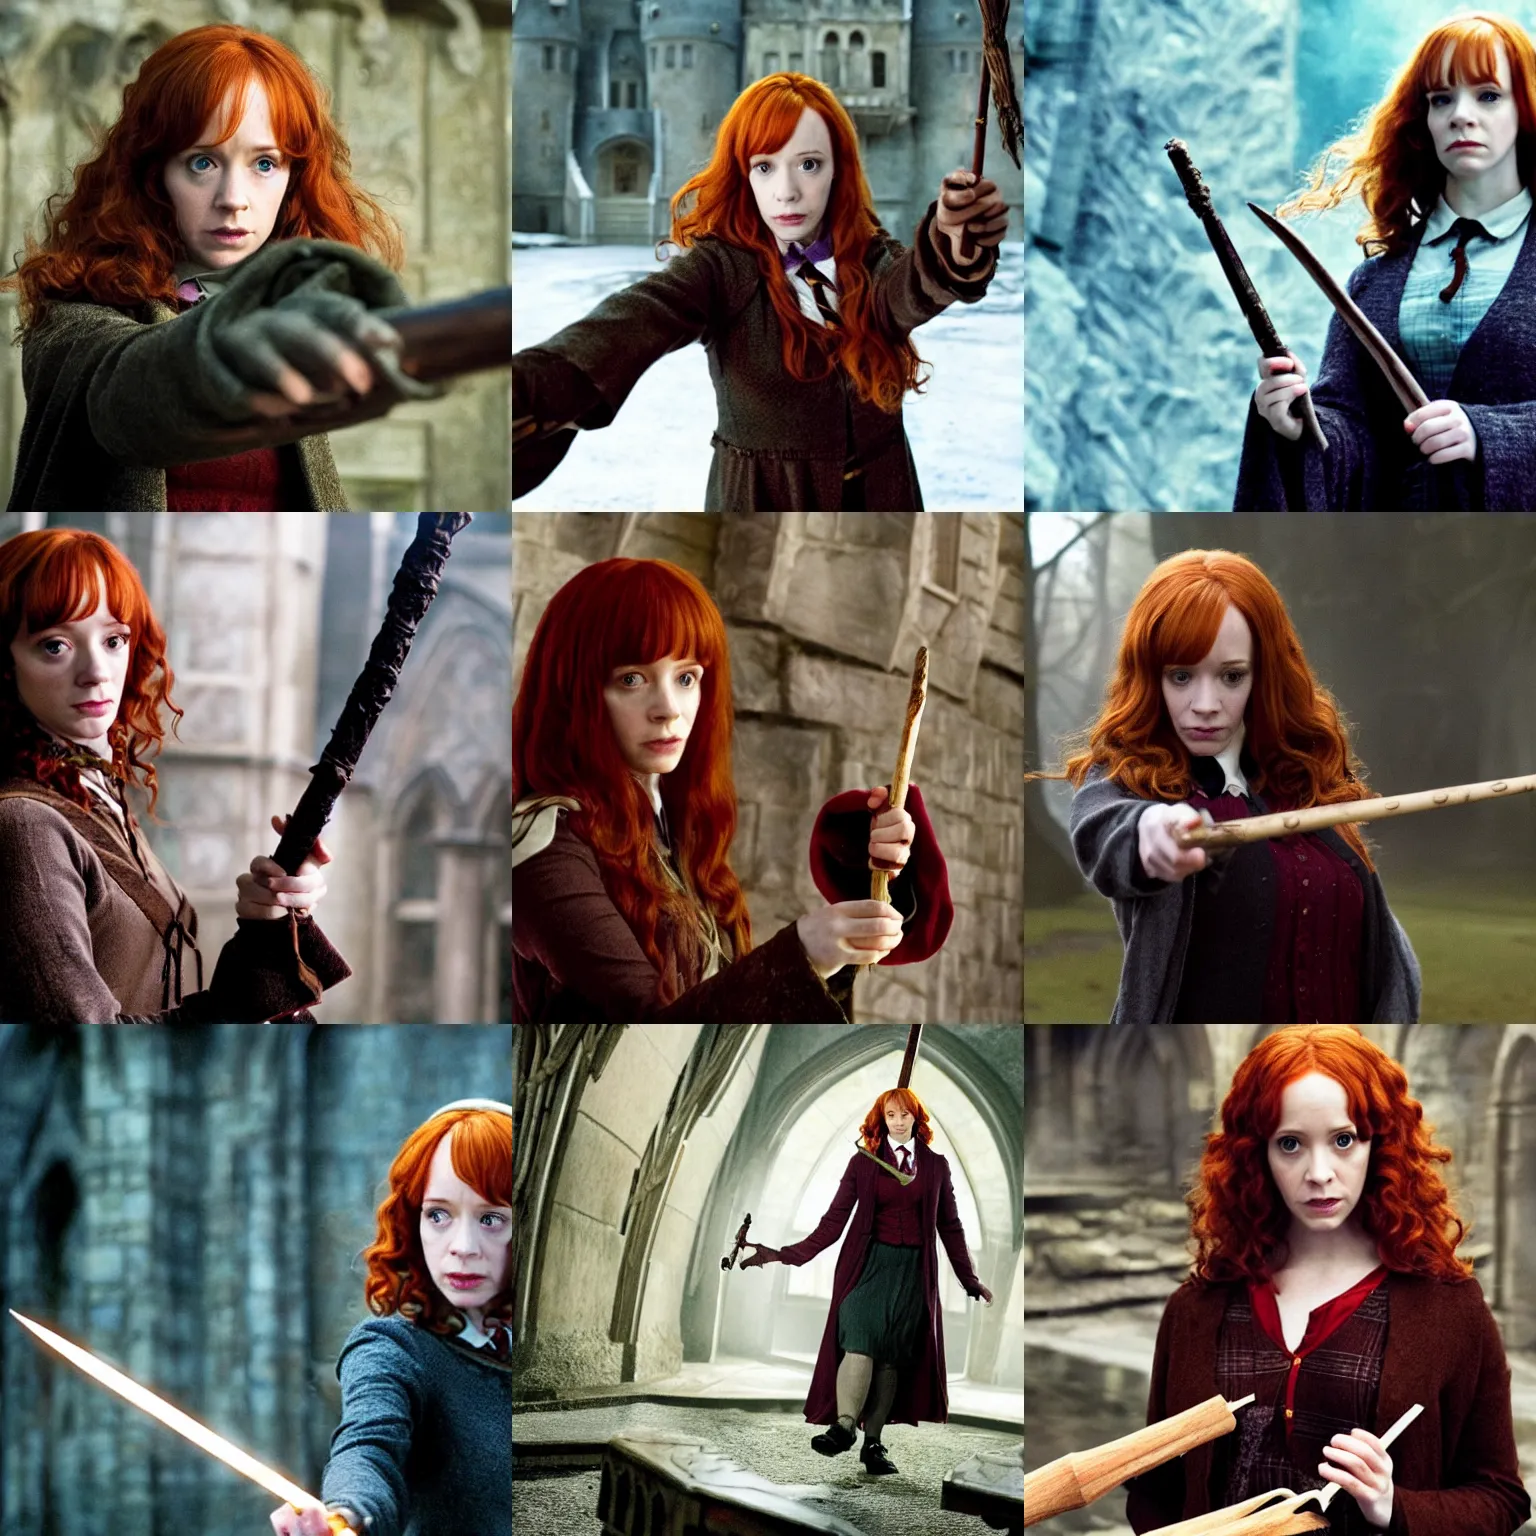 Prompt: female hogwarts student holding wand played by christina hendricks, movie still harry potter and the deathly hallows by david yates, film still from the movie directed by denis villeneuve, wide lens